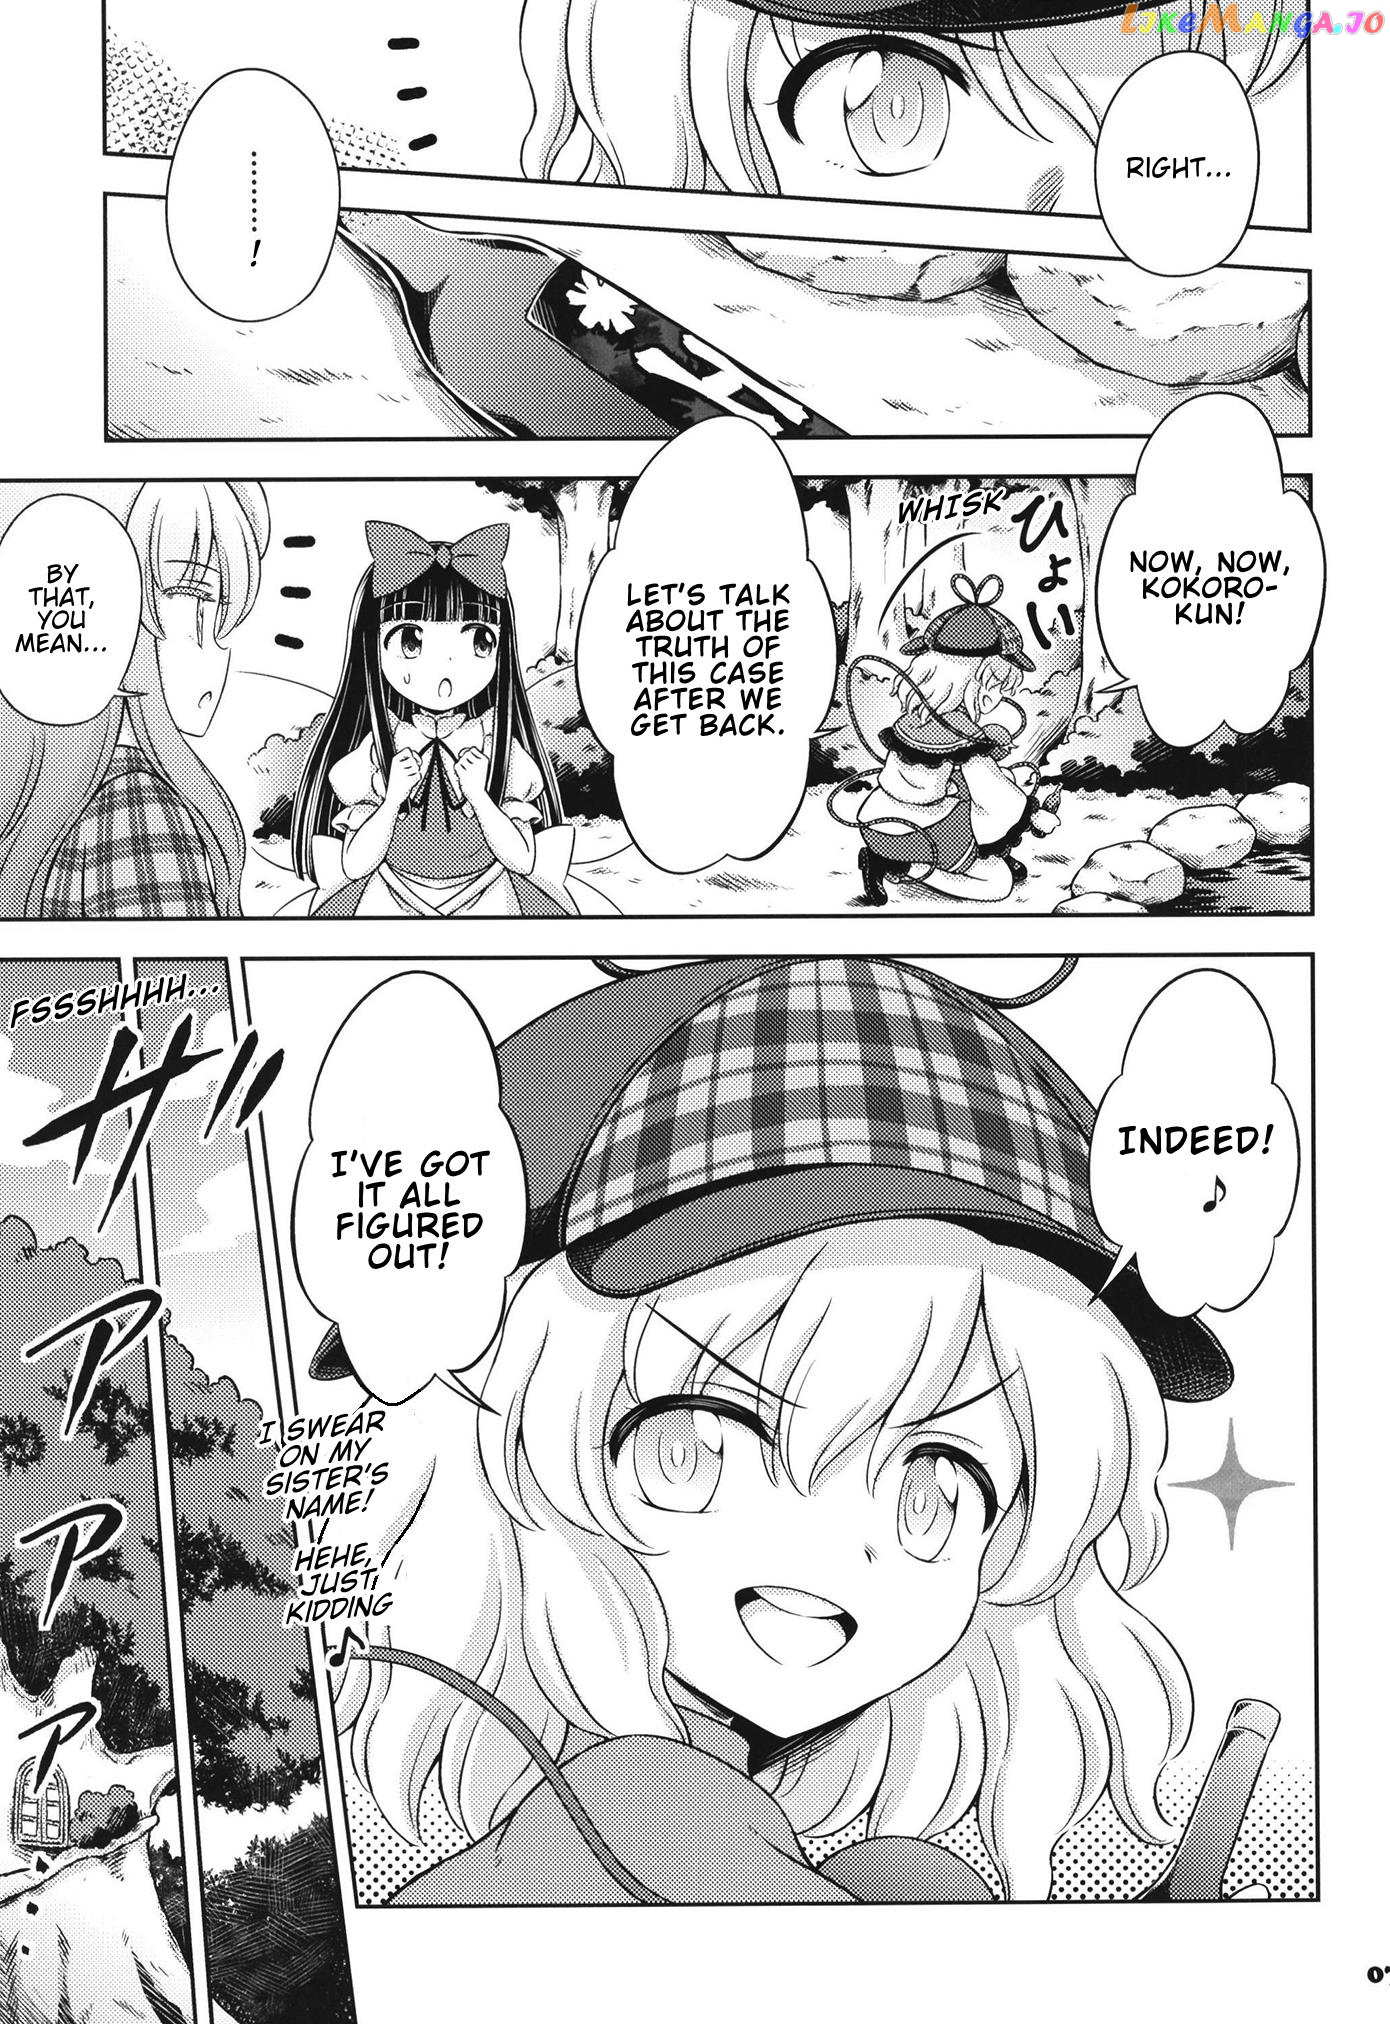 Sort-Of-Cheating Detective Koishi The Case Of The Fairy Serial Killer chapter 2 - page 6